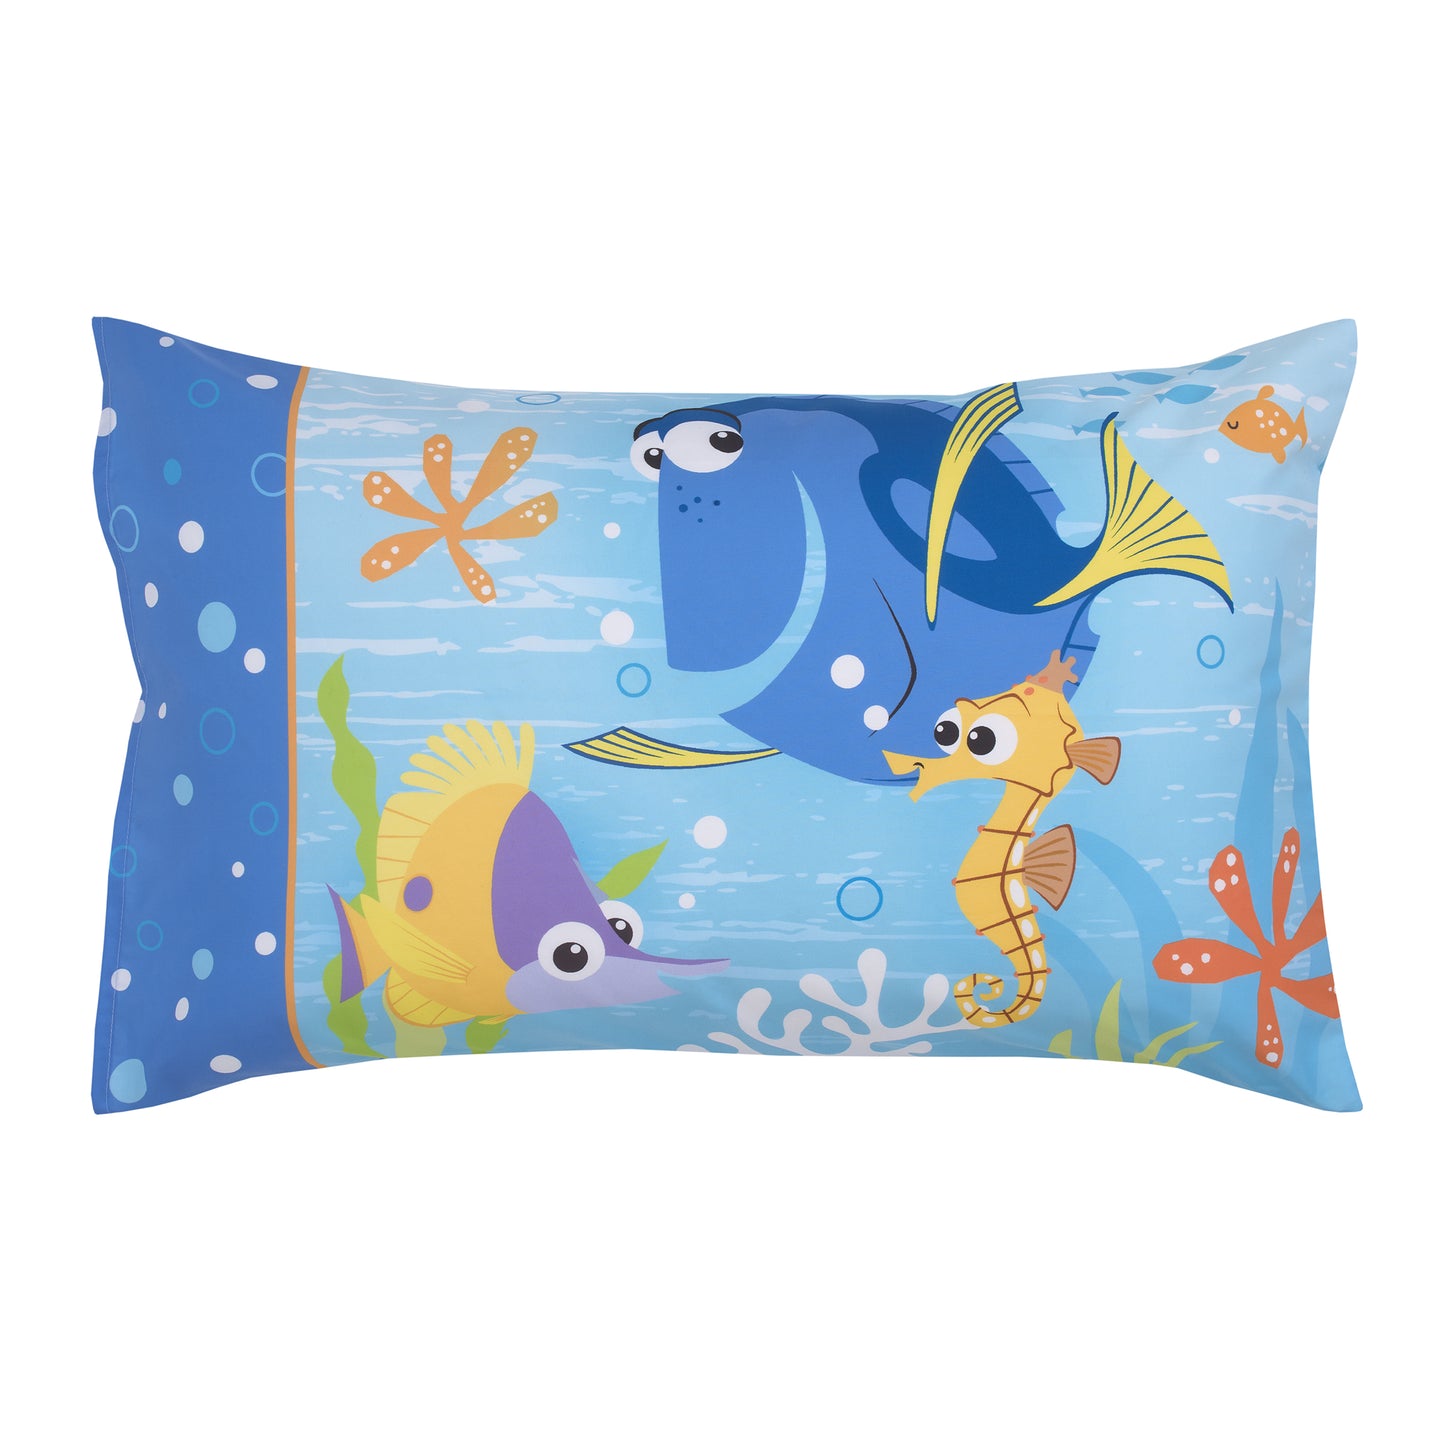 Disney Finding Nemo Aqua, Orange, and Green Let's Explore 4 Piece Toddler Bed Set - Comforter, Fitted Bottom Sheet, Flat Top Sheet, and Reversible Pillowcase